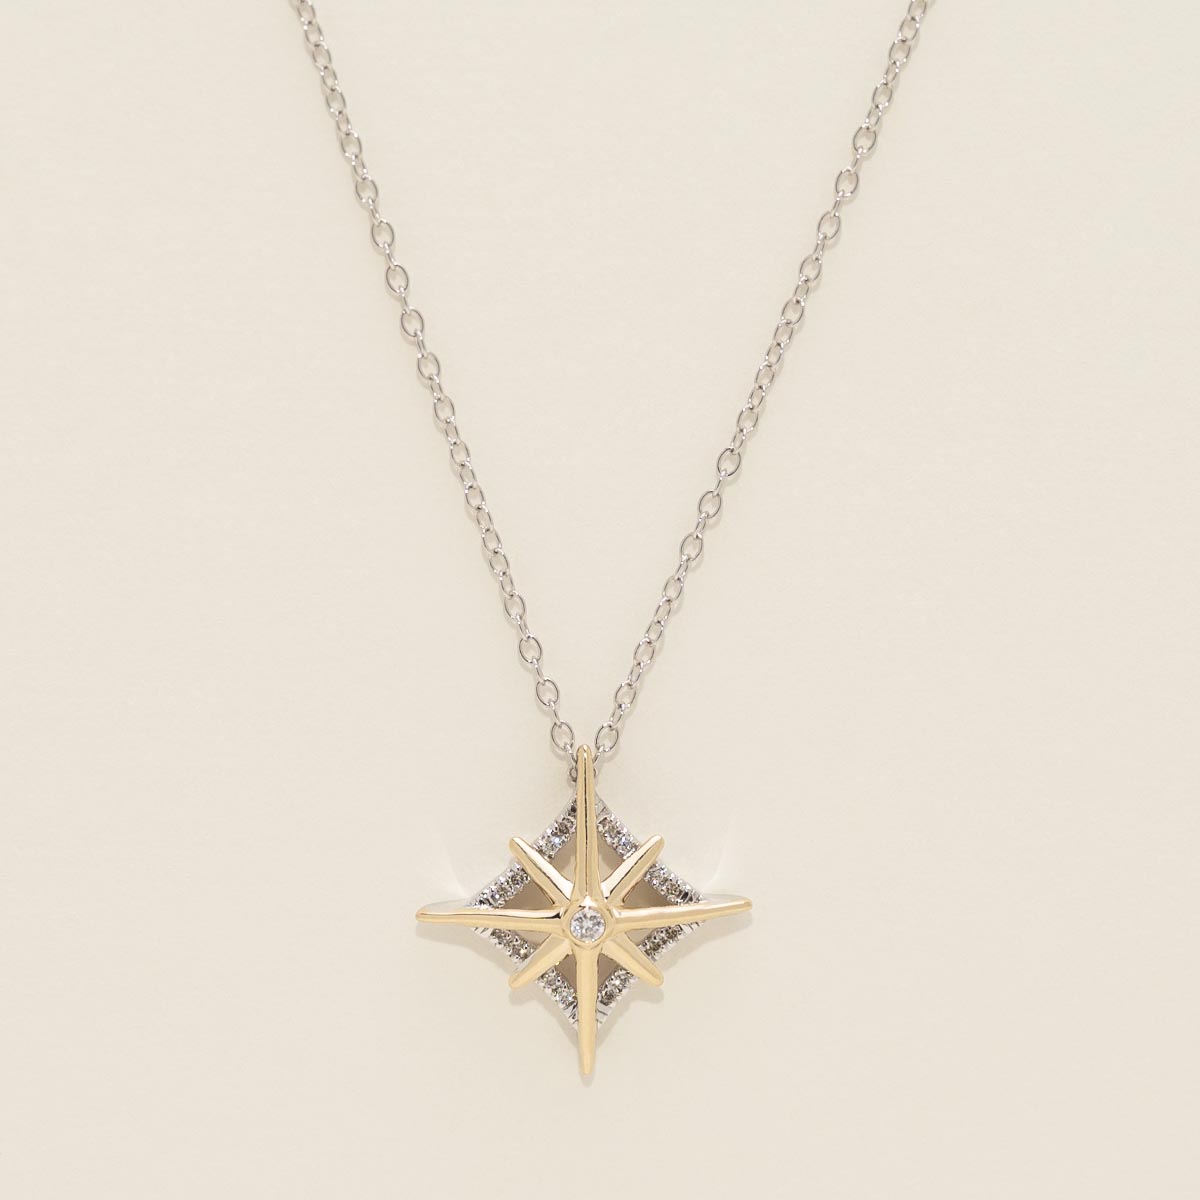 Northern Star Diamond Celestial Necklace in Sterling Silver and 10kt Yellow Gold (1/10ct tw)